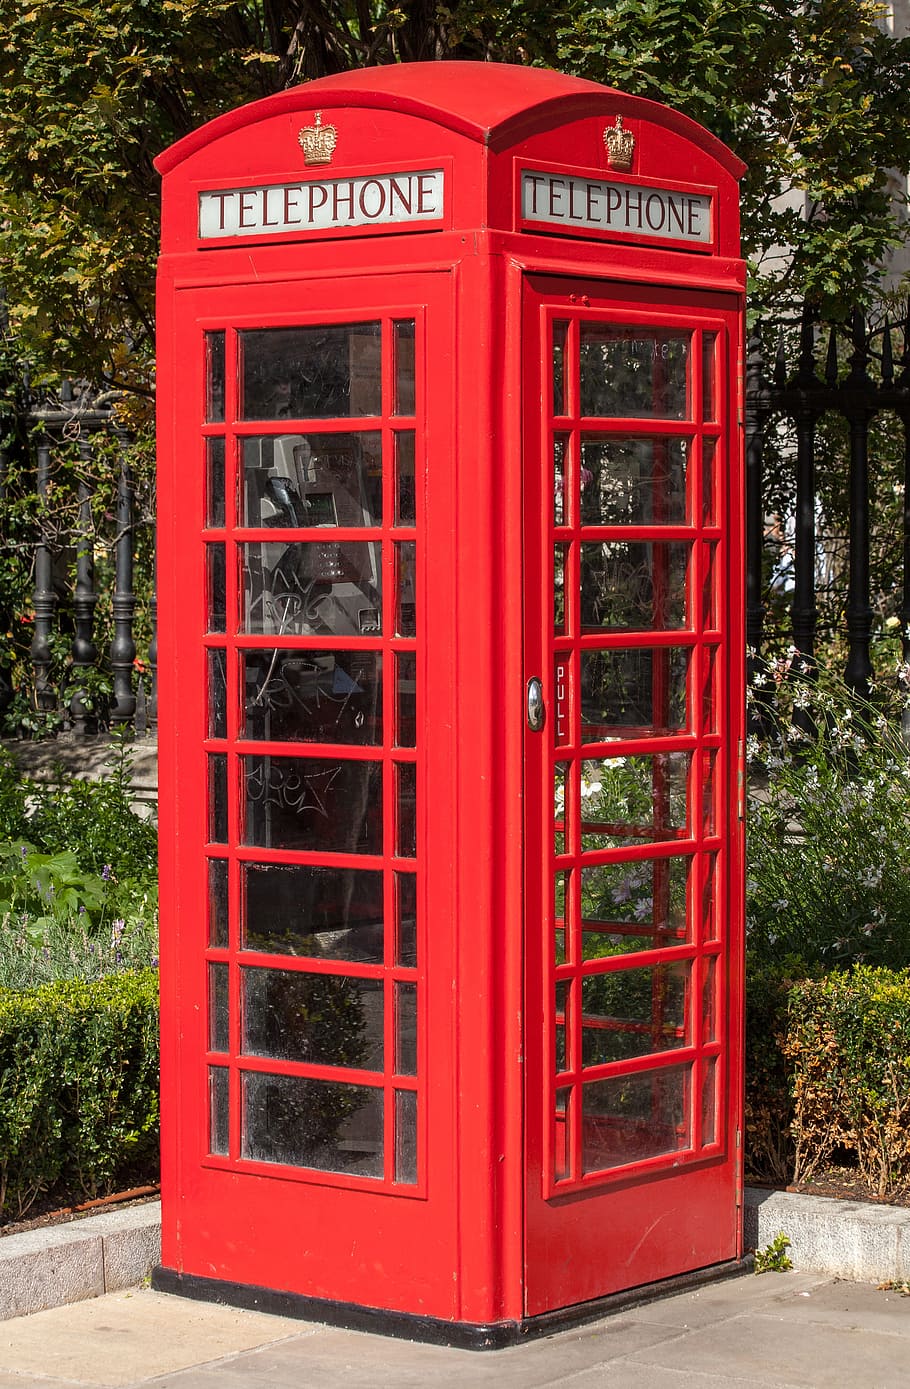 red, telephone booth, green, trees, daytime, phone, public phone, great britain, street, shed